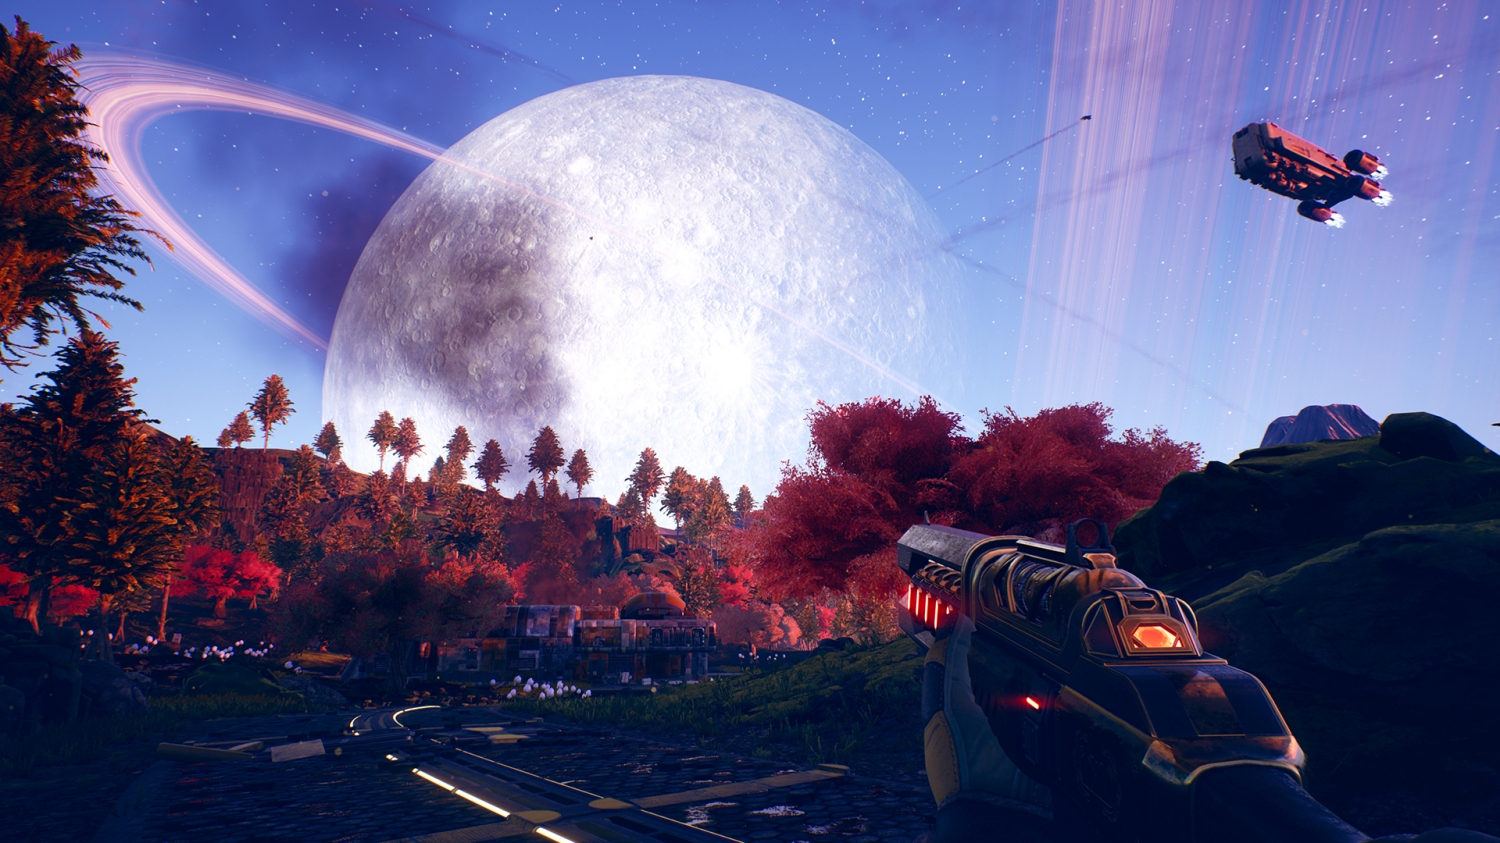 The Outer Worlds 2 will be published by Microsoft